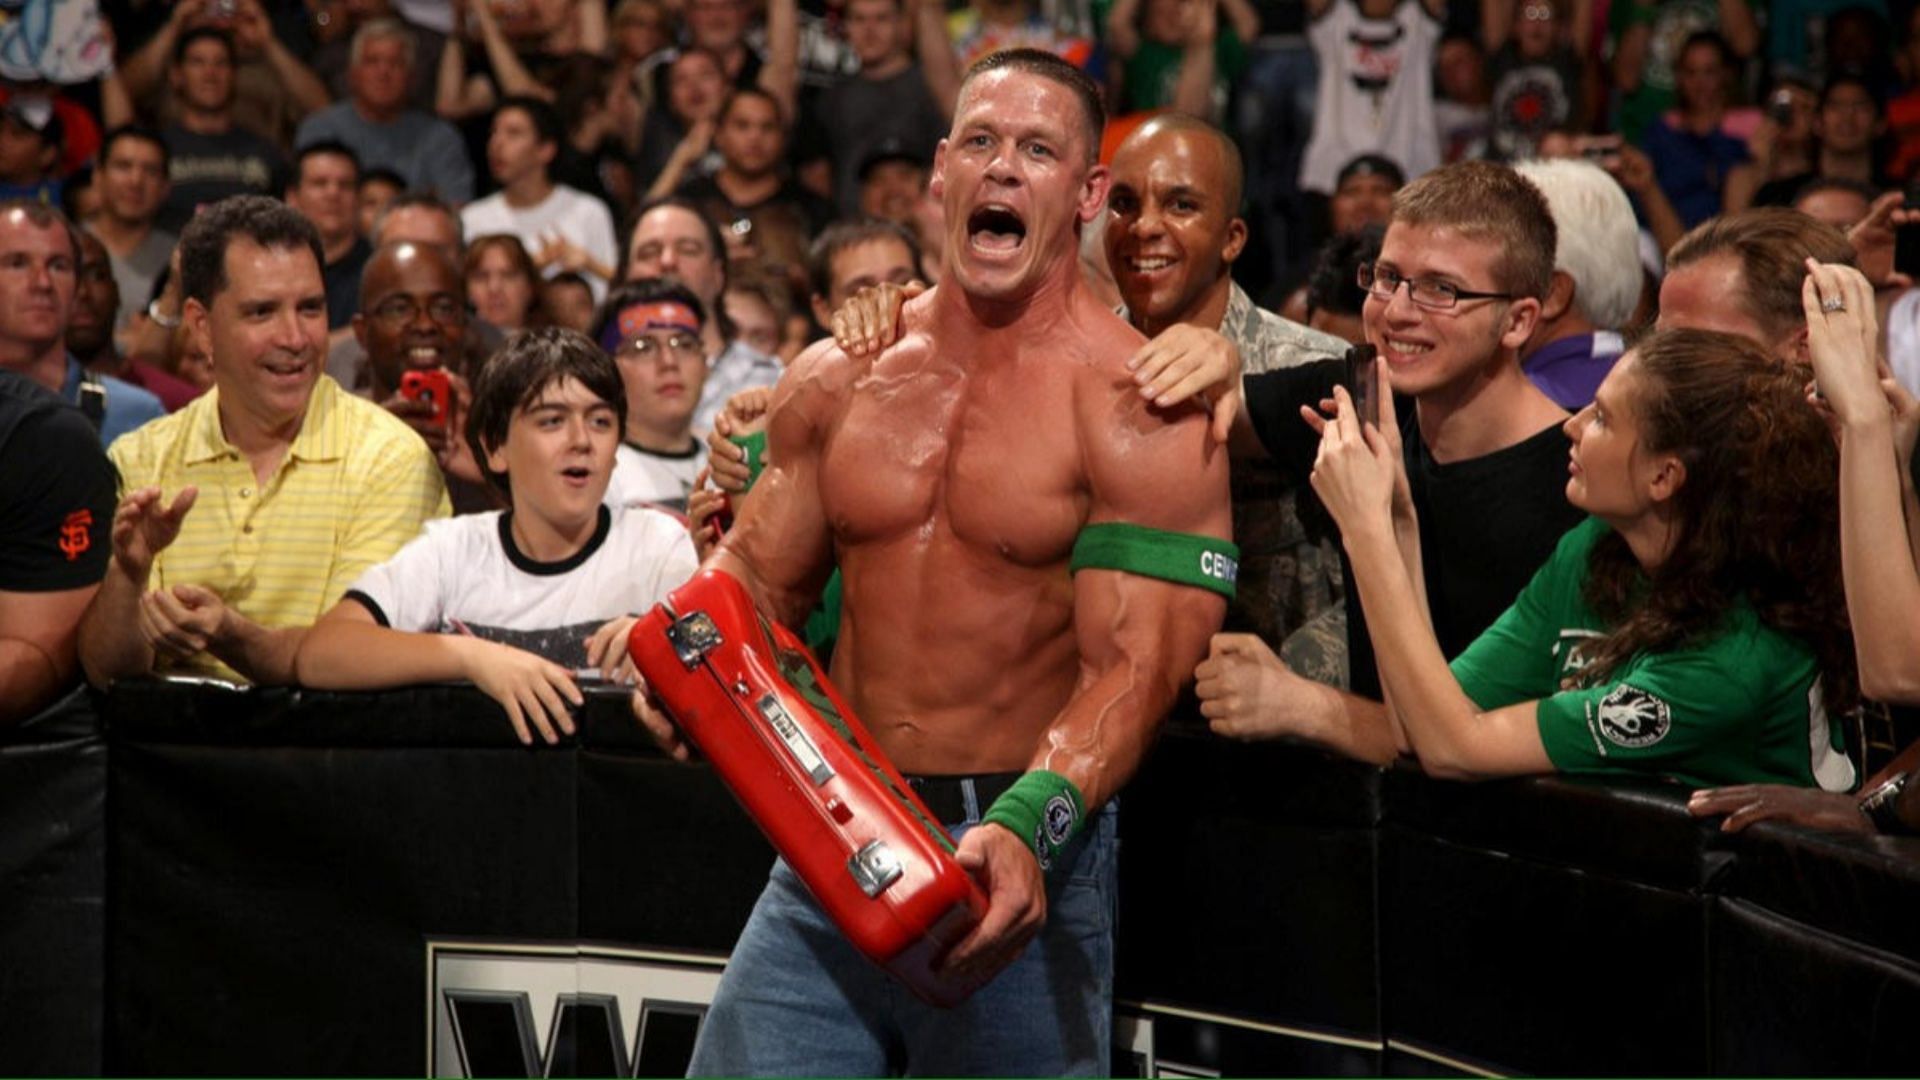 John Cena won the Money in the Bank briefcase in 2012.